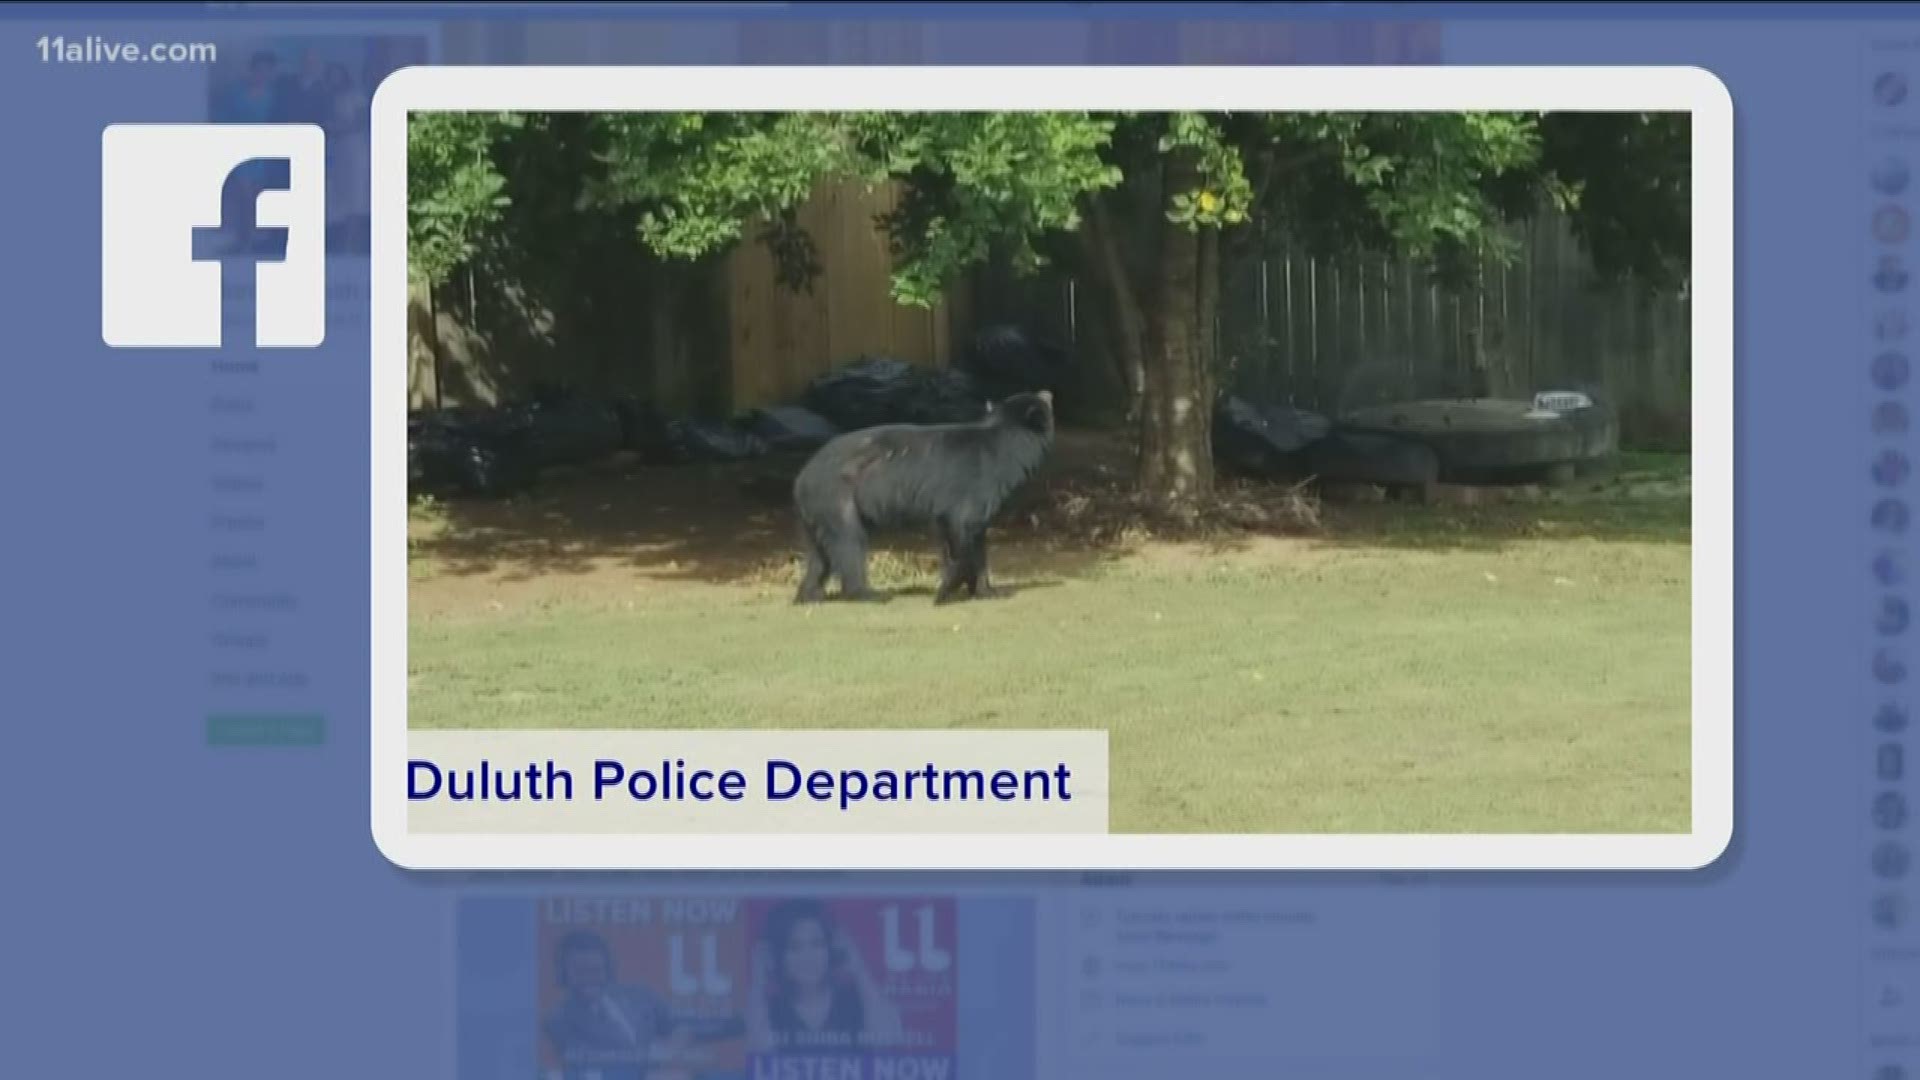 Video shows the bear wandering around the backyard of a home.